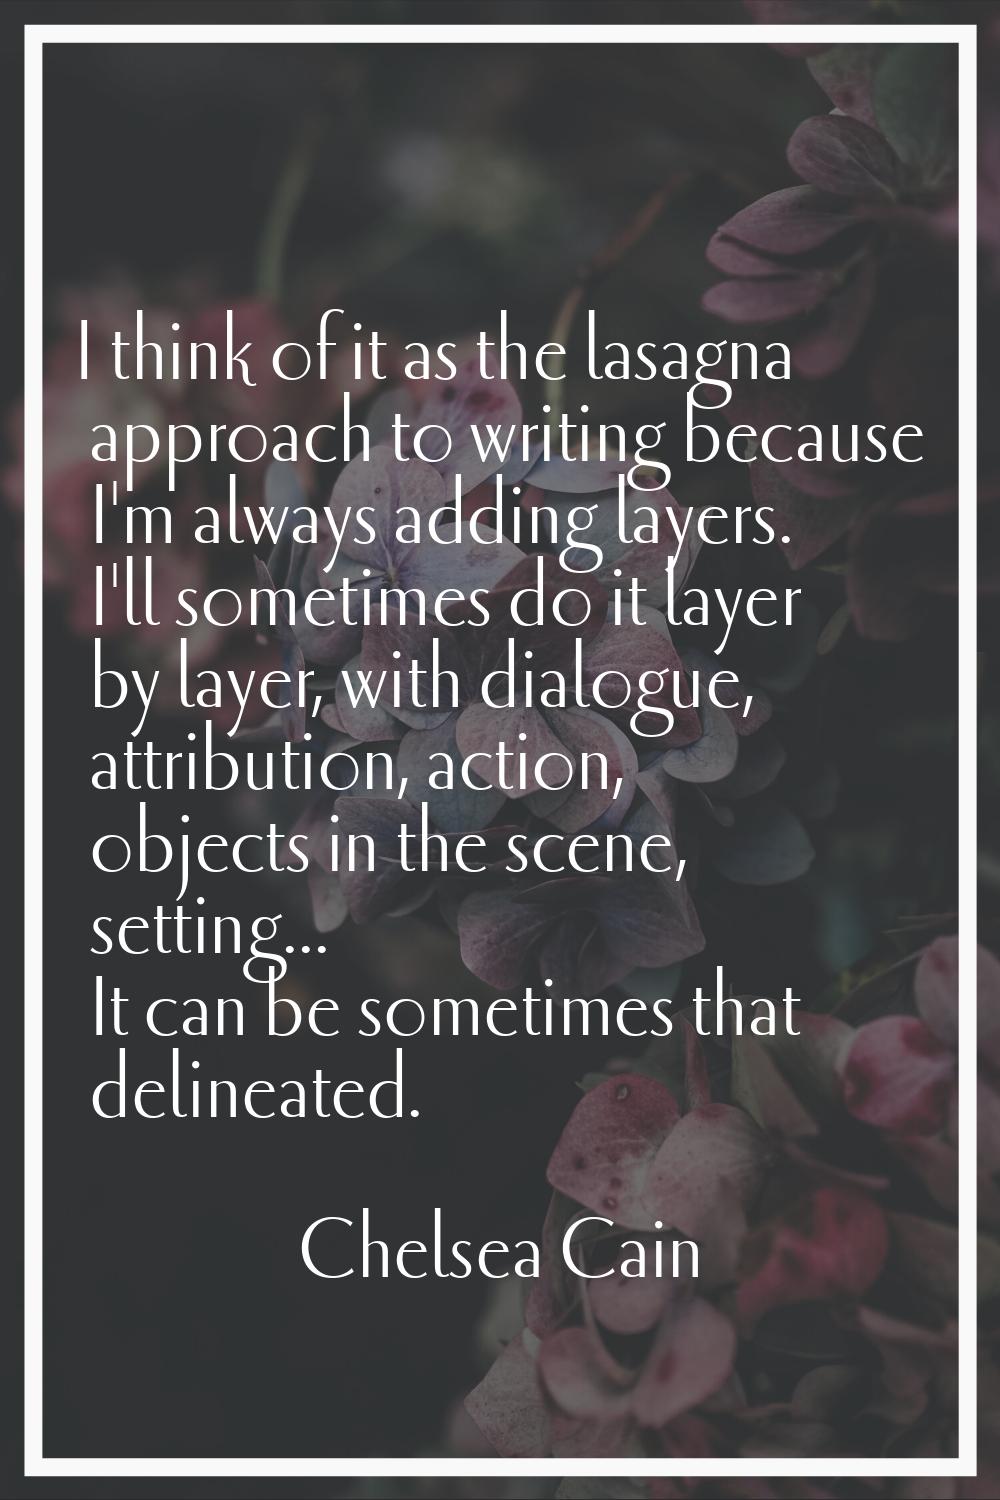 I think of it as the lasagna approach to writing because I'm always adding layers. I'll sometimes d